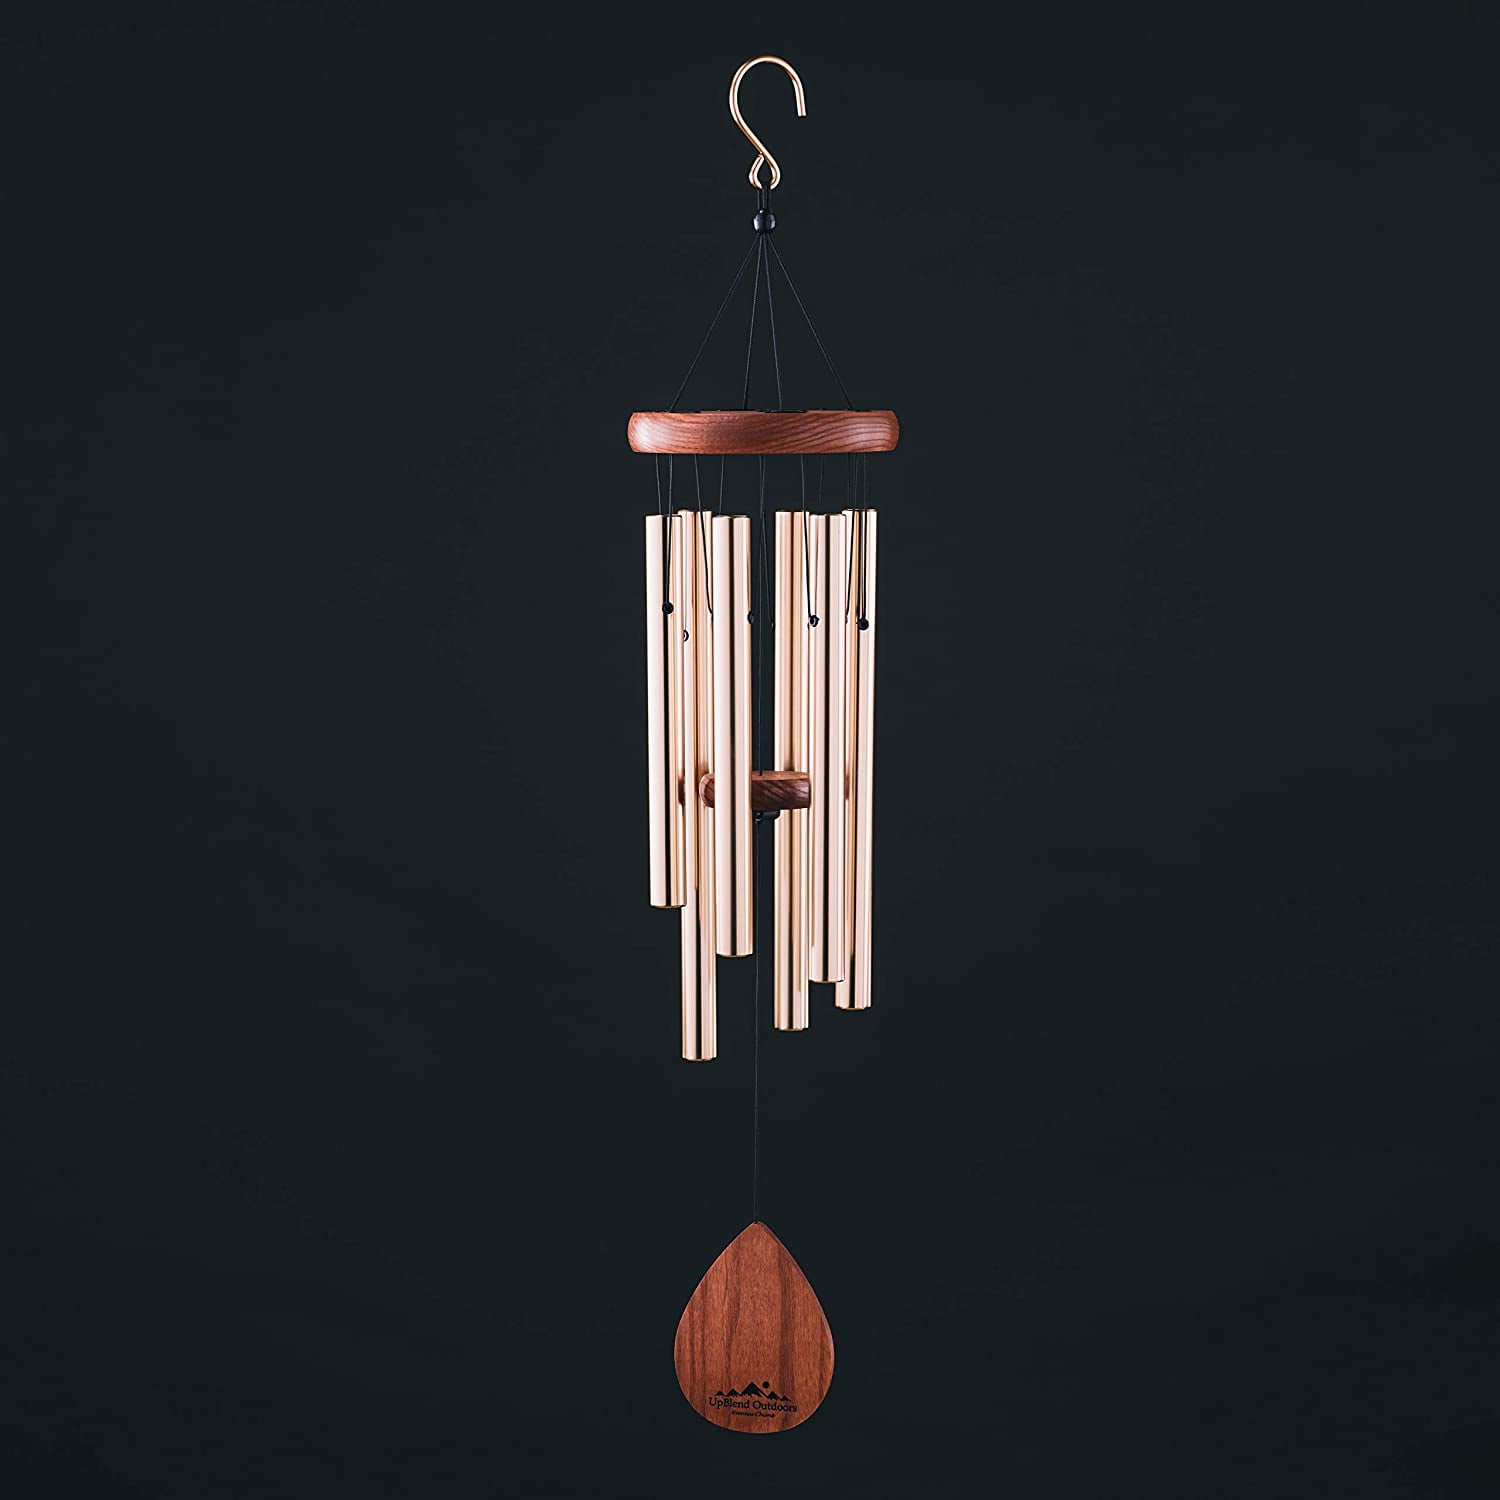 ; A Beautiful Gift for Your Patio Havasu Hand-Tuned UpBlend Outdoors Medium Wind Chime and Outdoor Home décor. Garden 28 Total Length 